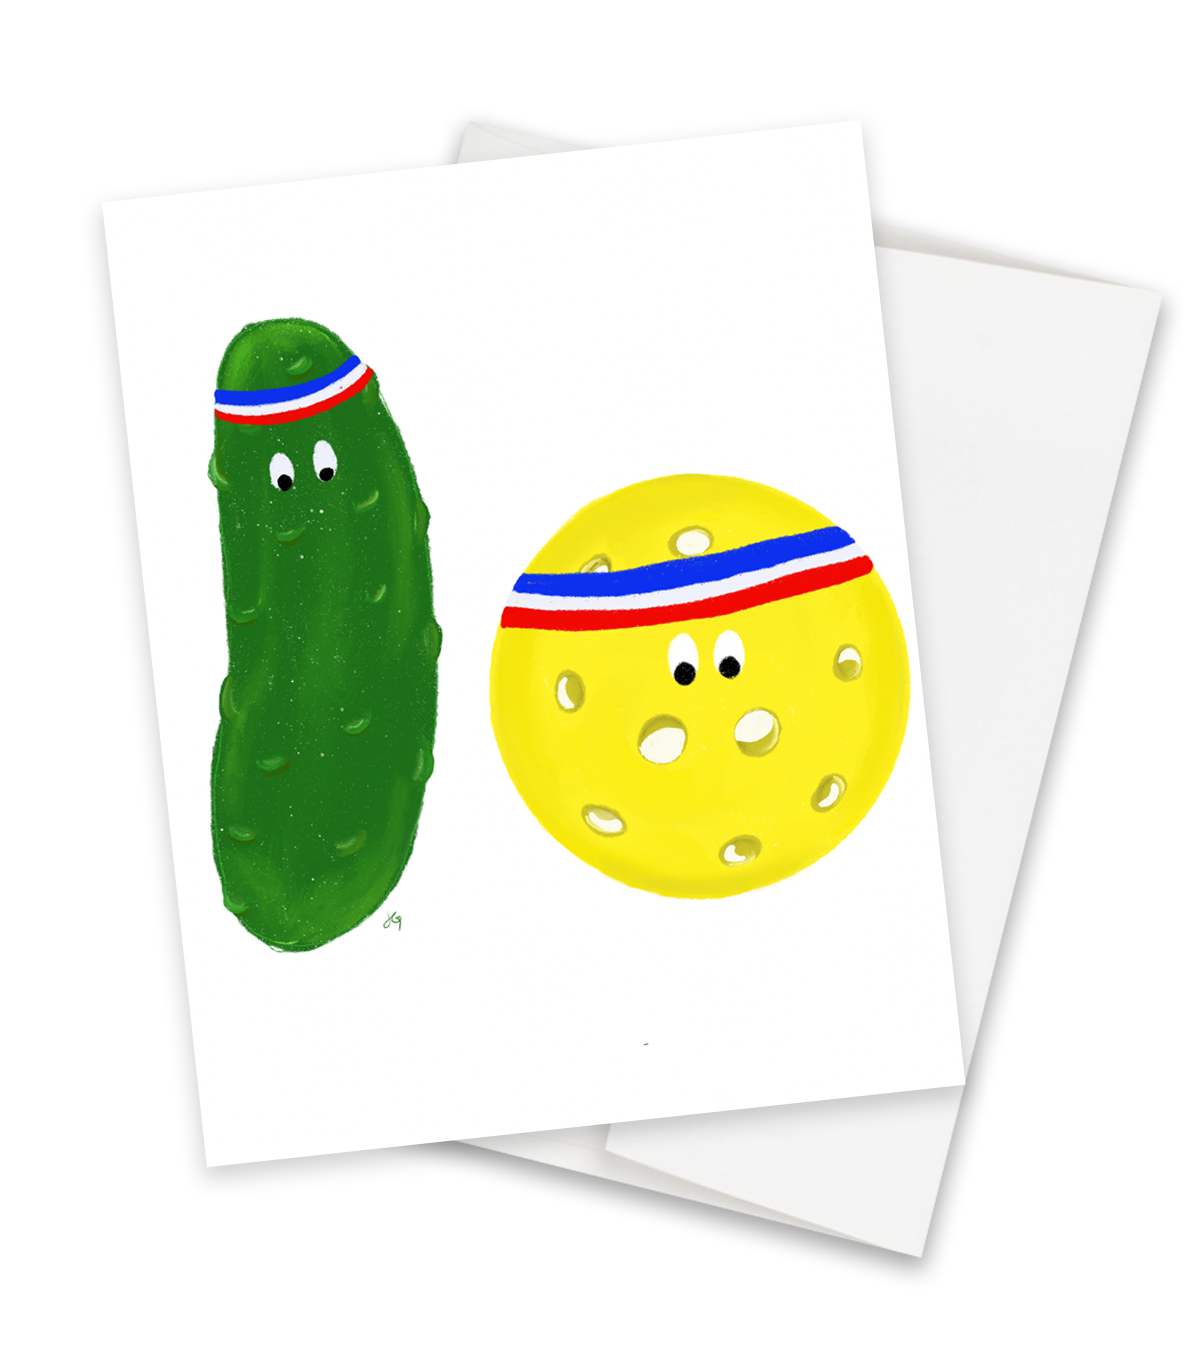 greeting card with a pickle and a ball with sweatbands around their hands. A pun on pickle ball